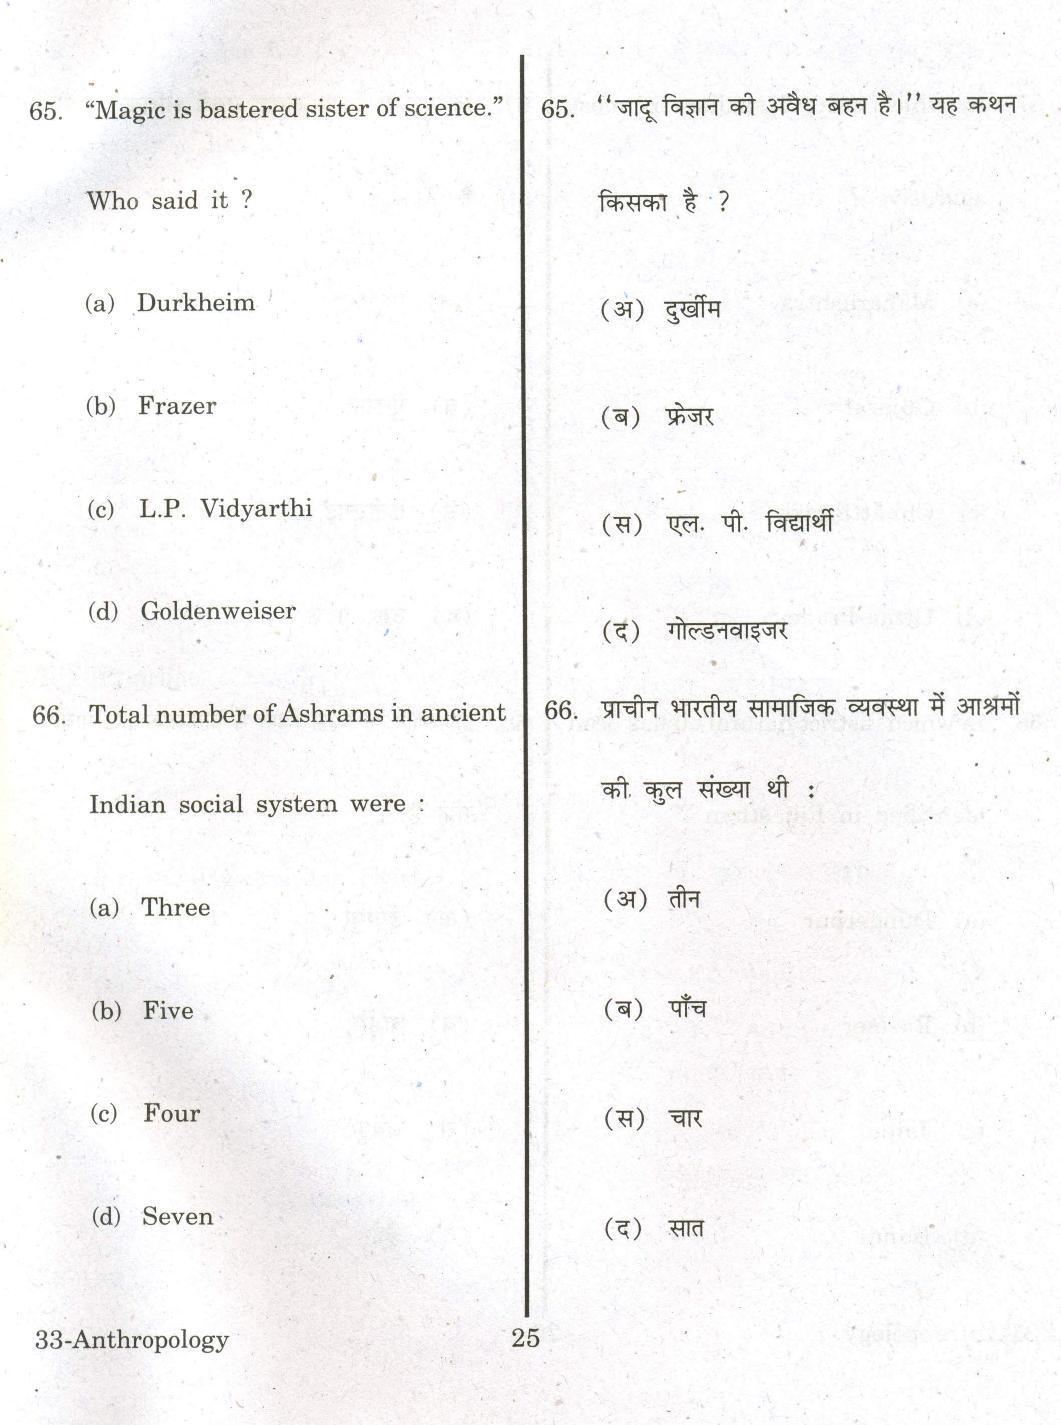 URATPG Anthropology 2013 Question Paper - Page 24